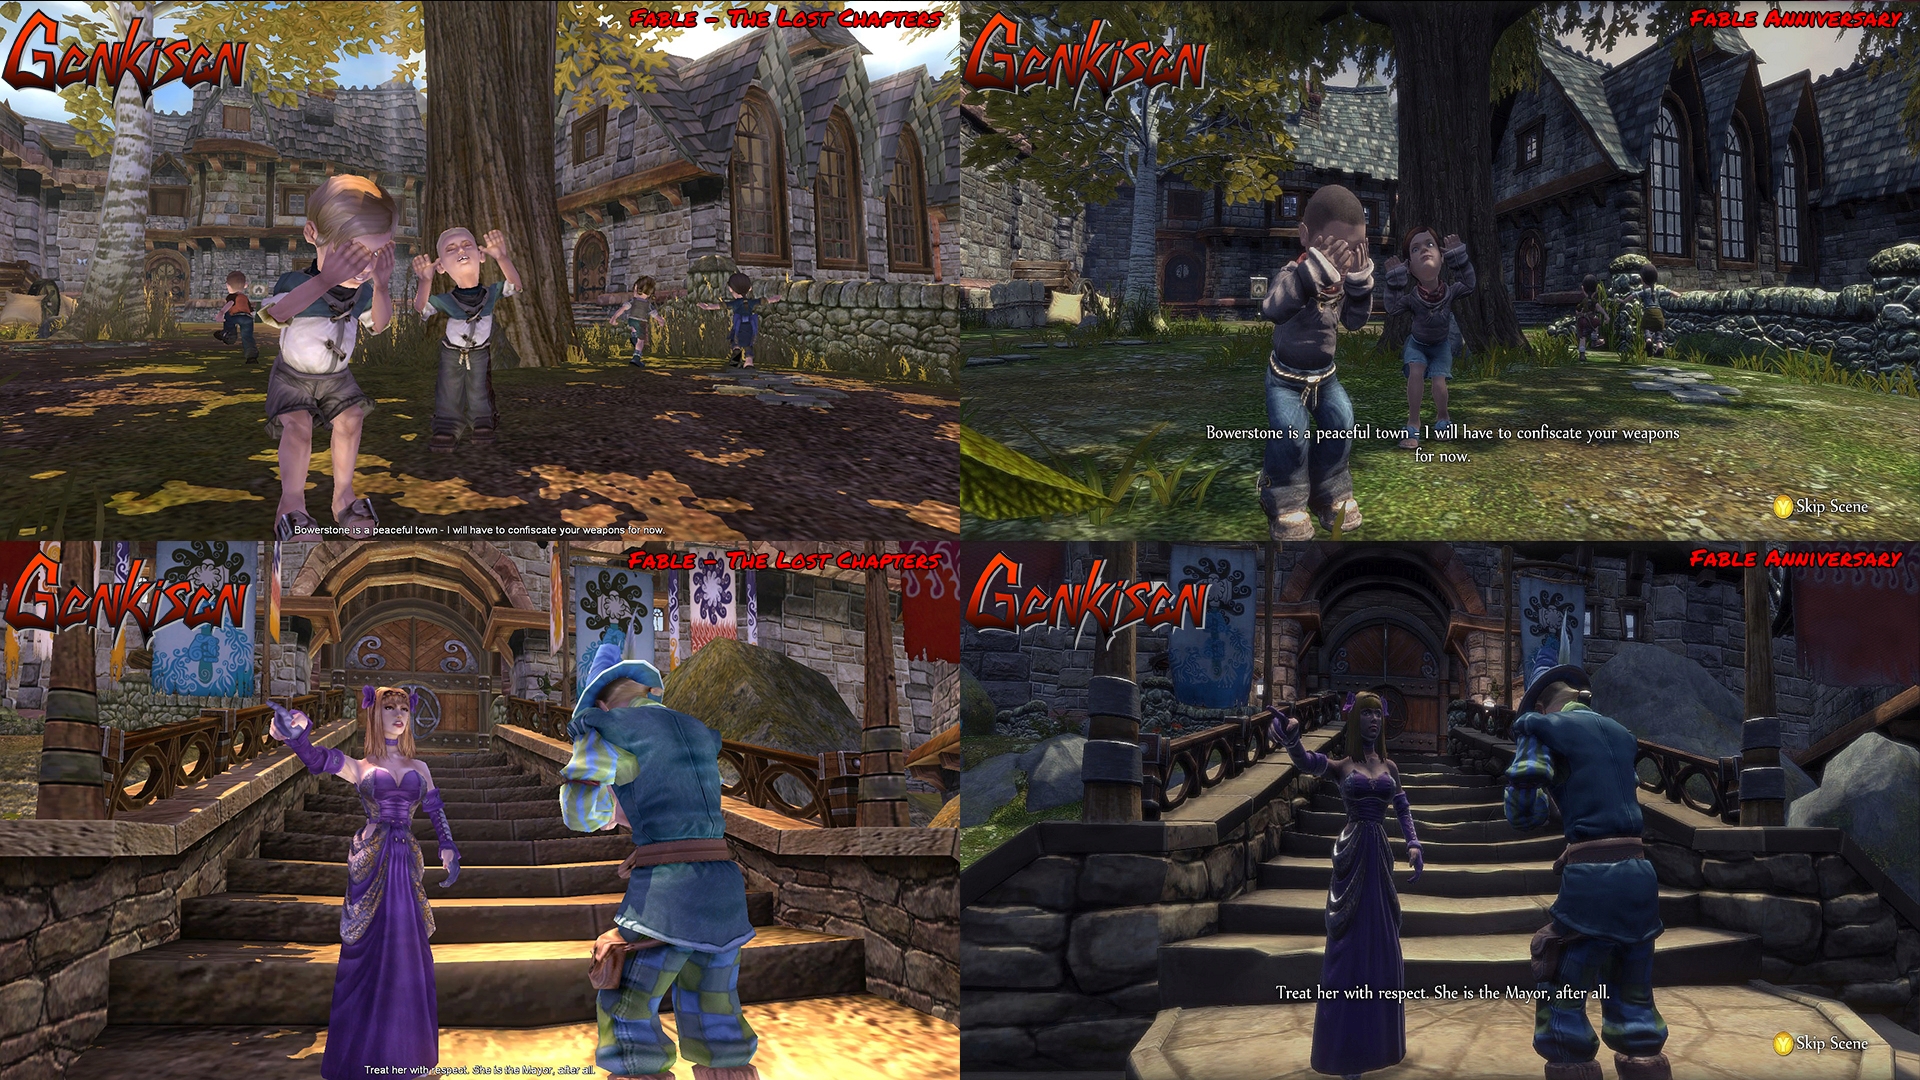 fable anniversary mods pc